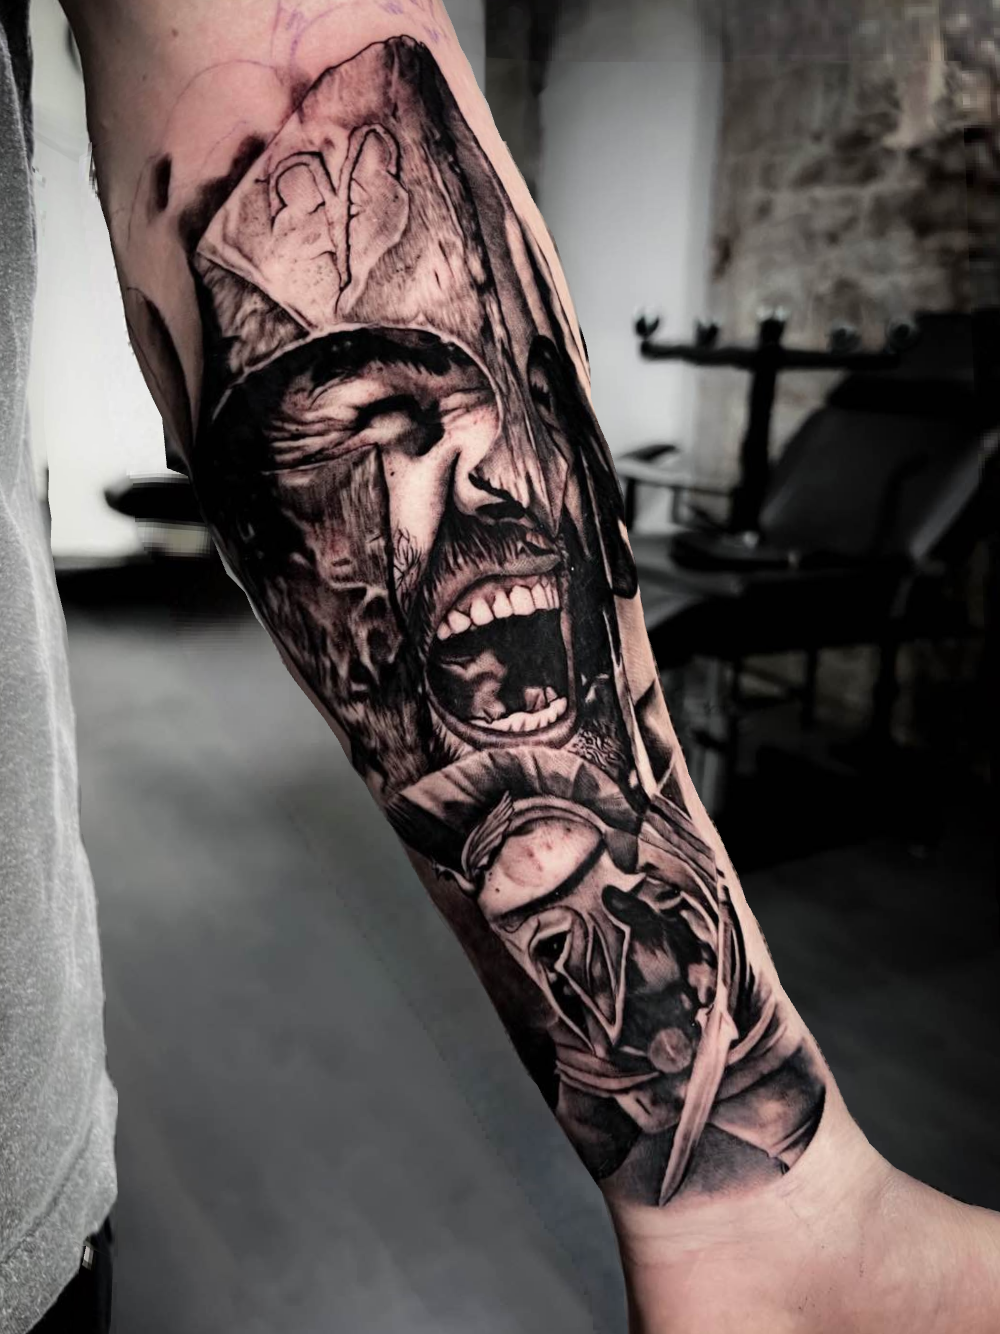 Tattoo made by KORDIAN BETCHER TATTOO at INKsearch